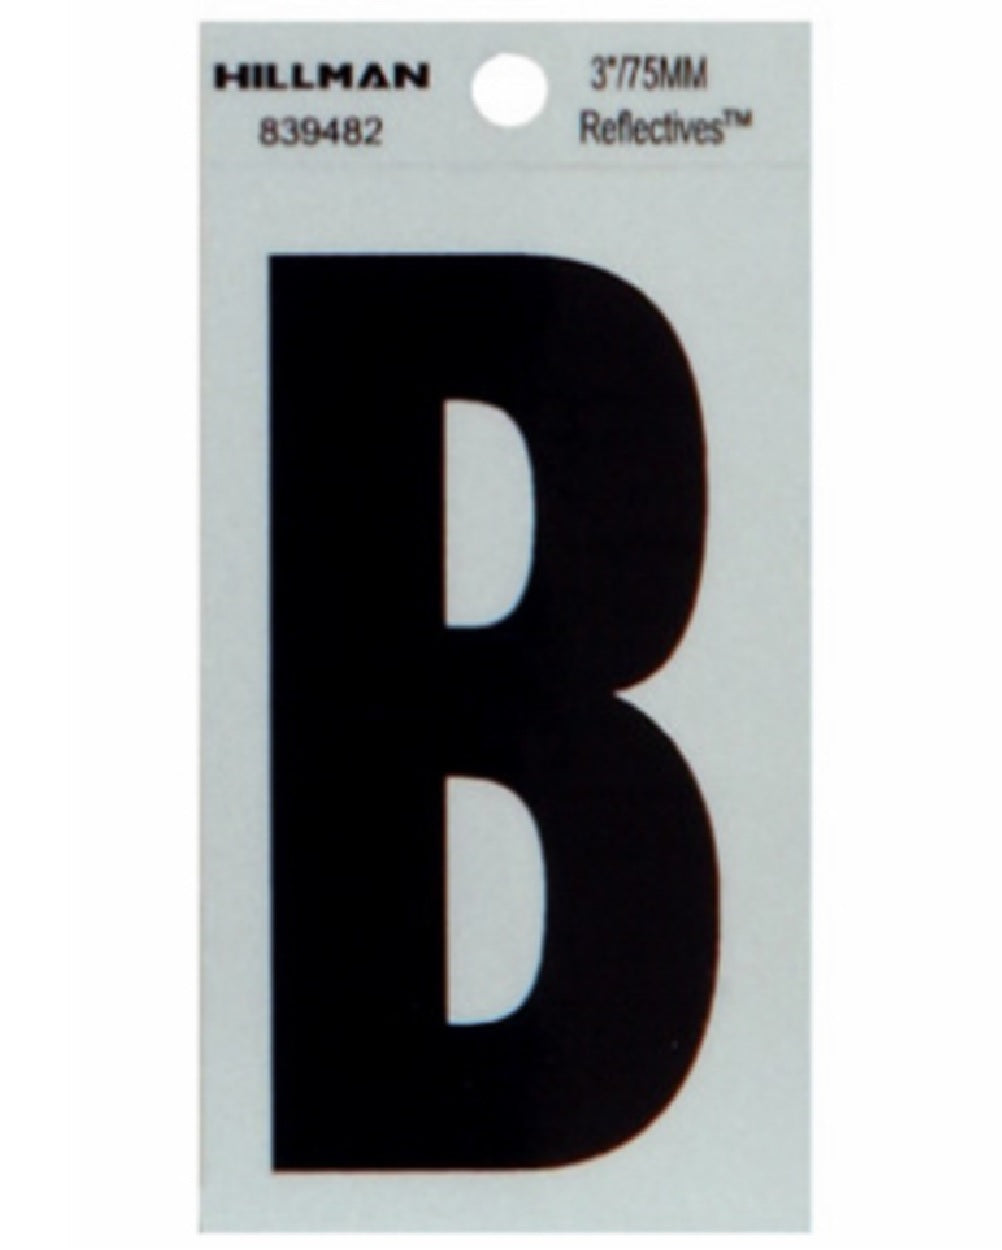 Hillman Fasteners 839482 Reflective Adhesive Vinyl Letter B Sign, Black And Silver, 3 Inch